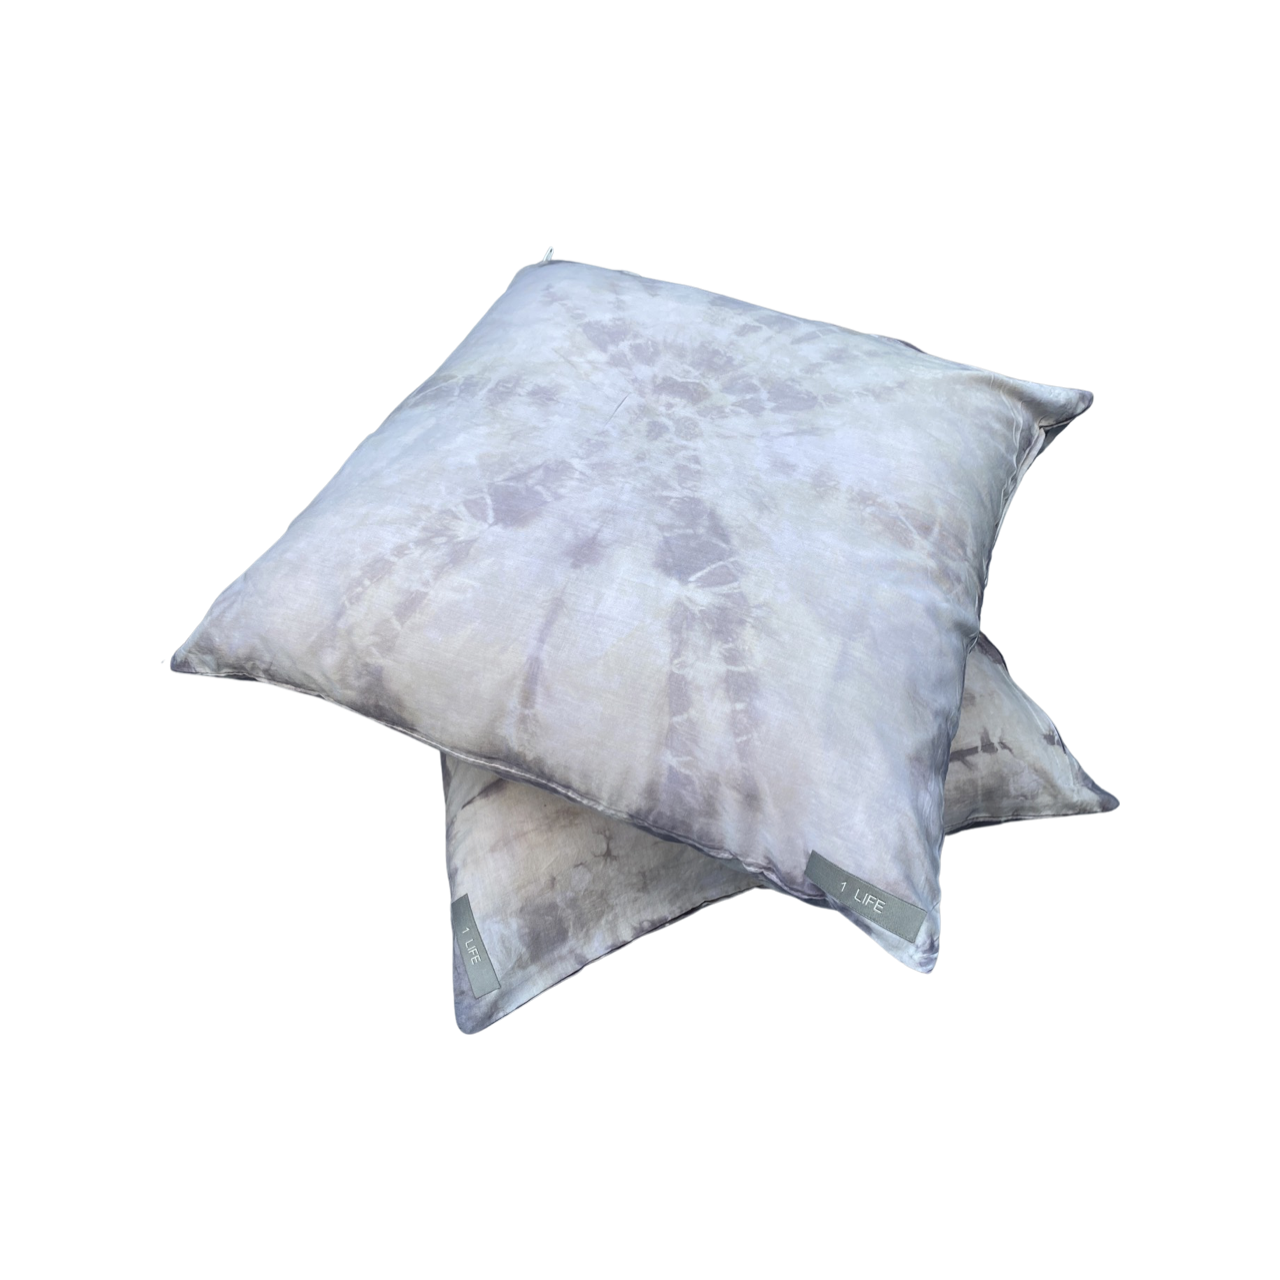 2 Tie Dyed Pillowcases in Gray Day by 1 Life